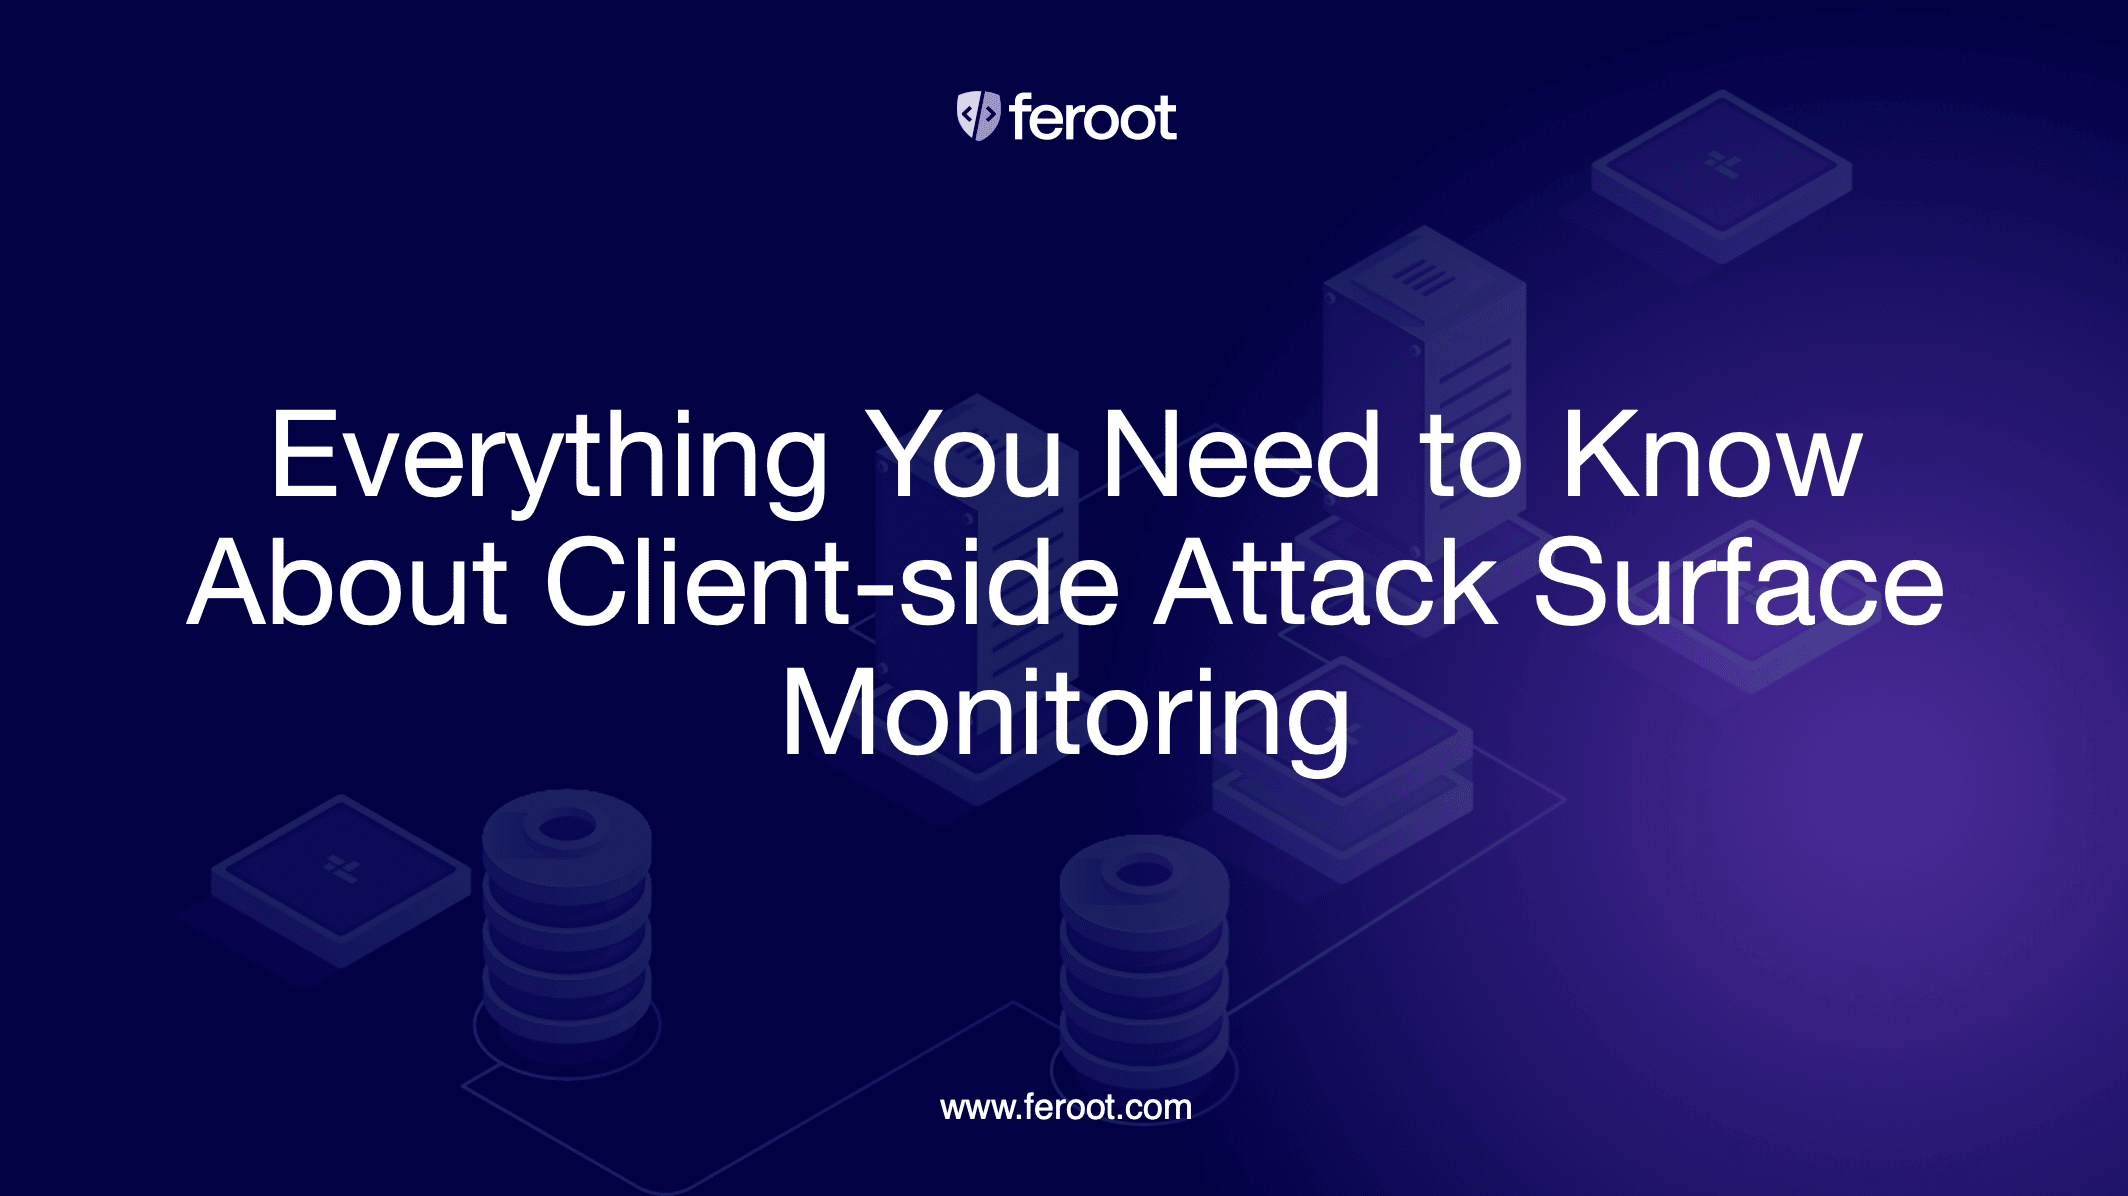 Client-side Attack Surface Monitoring